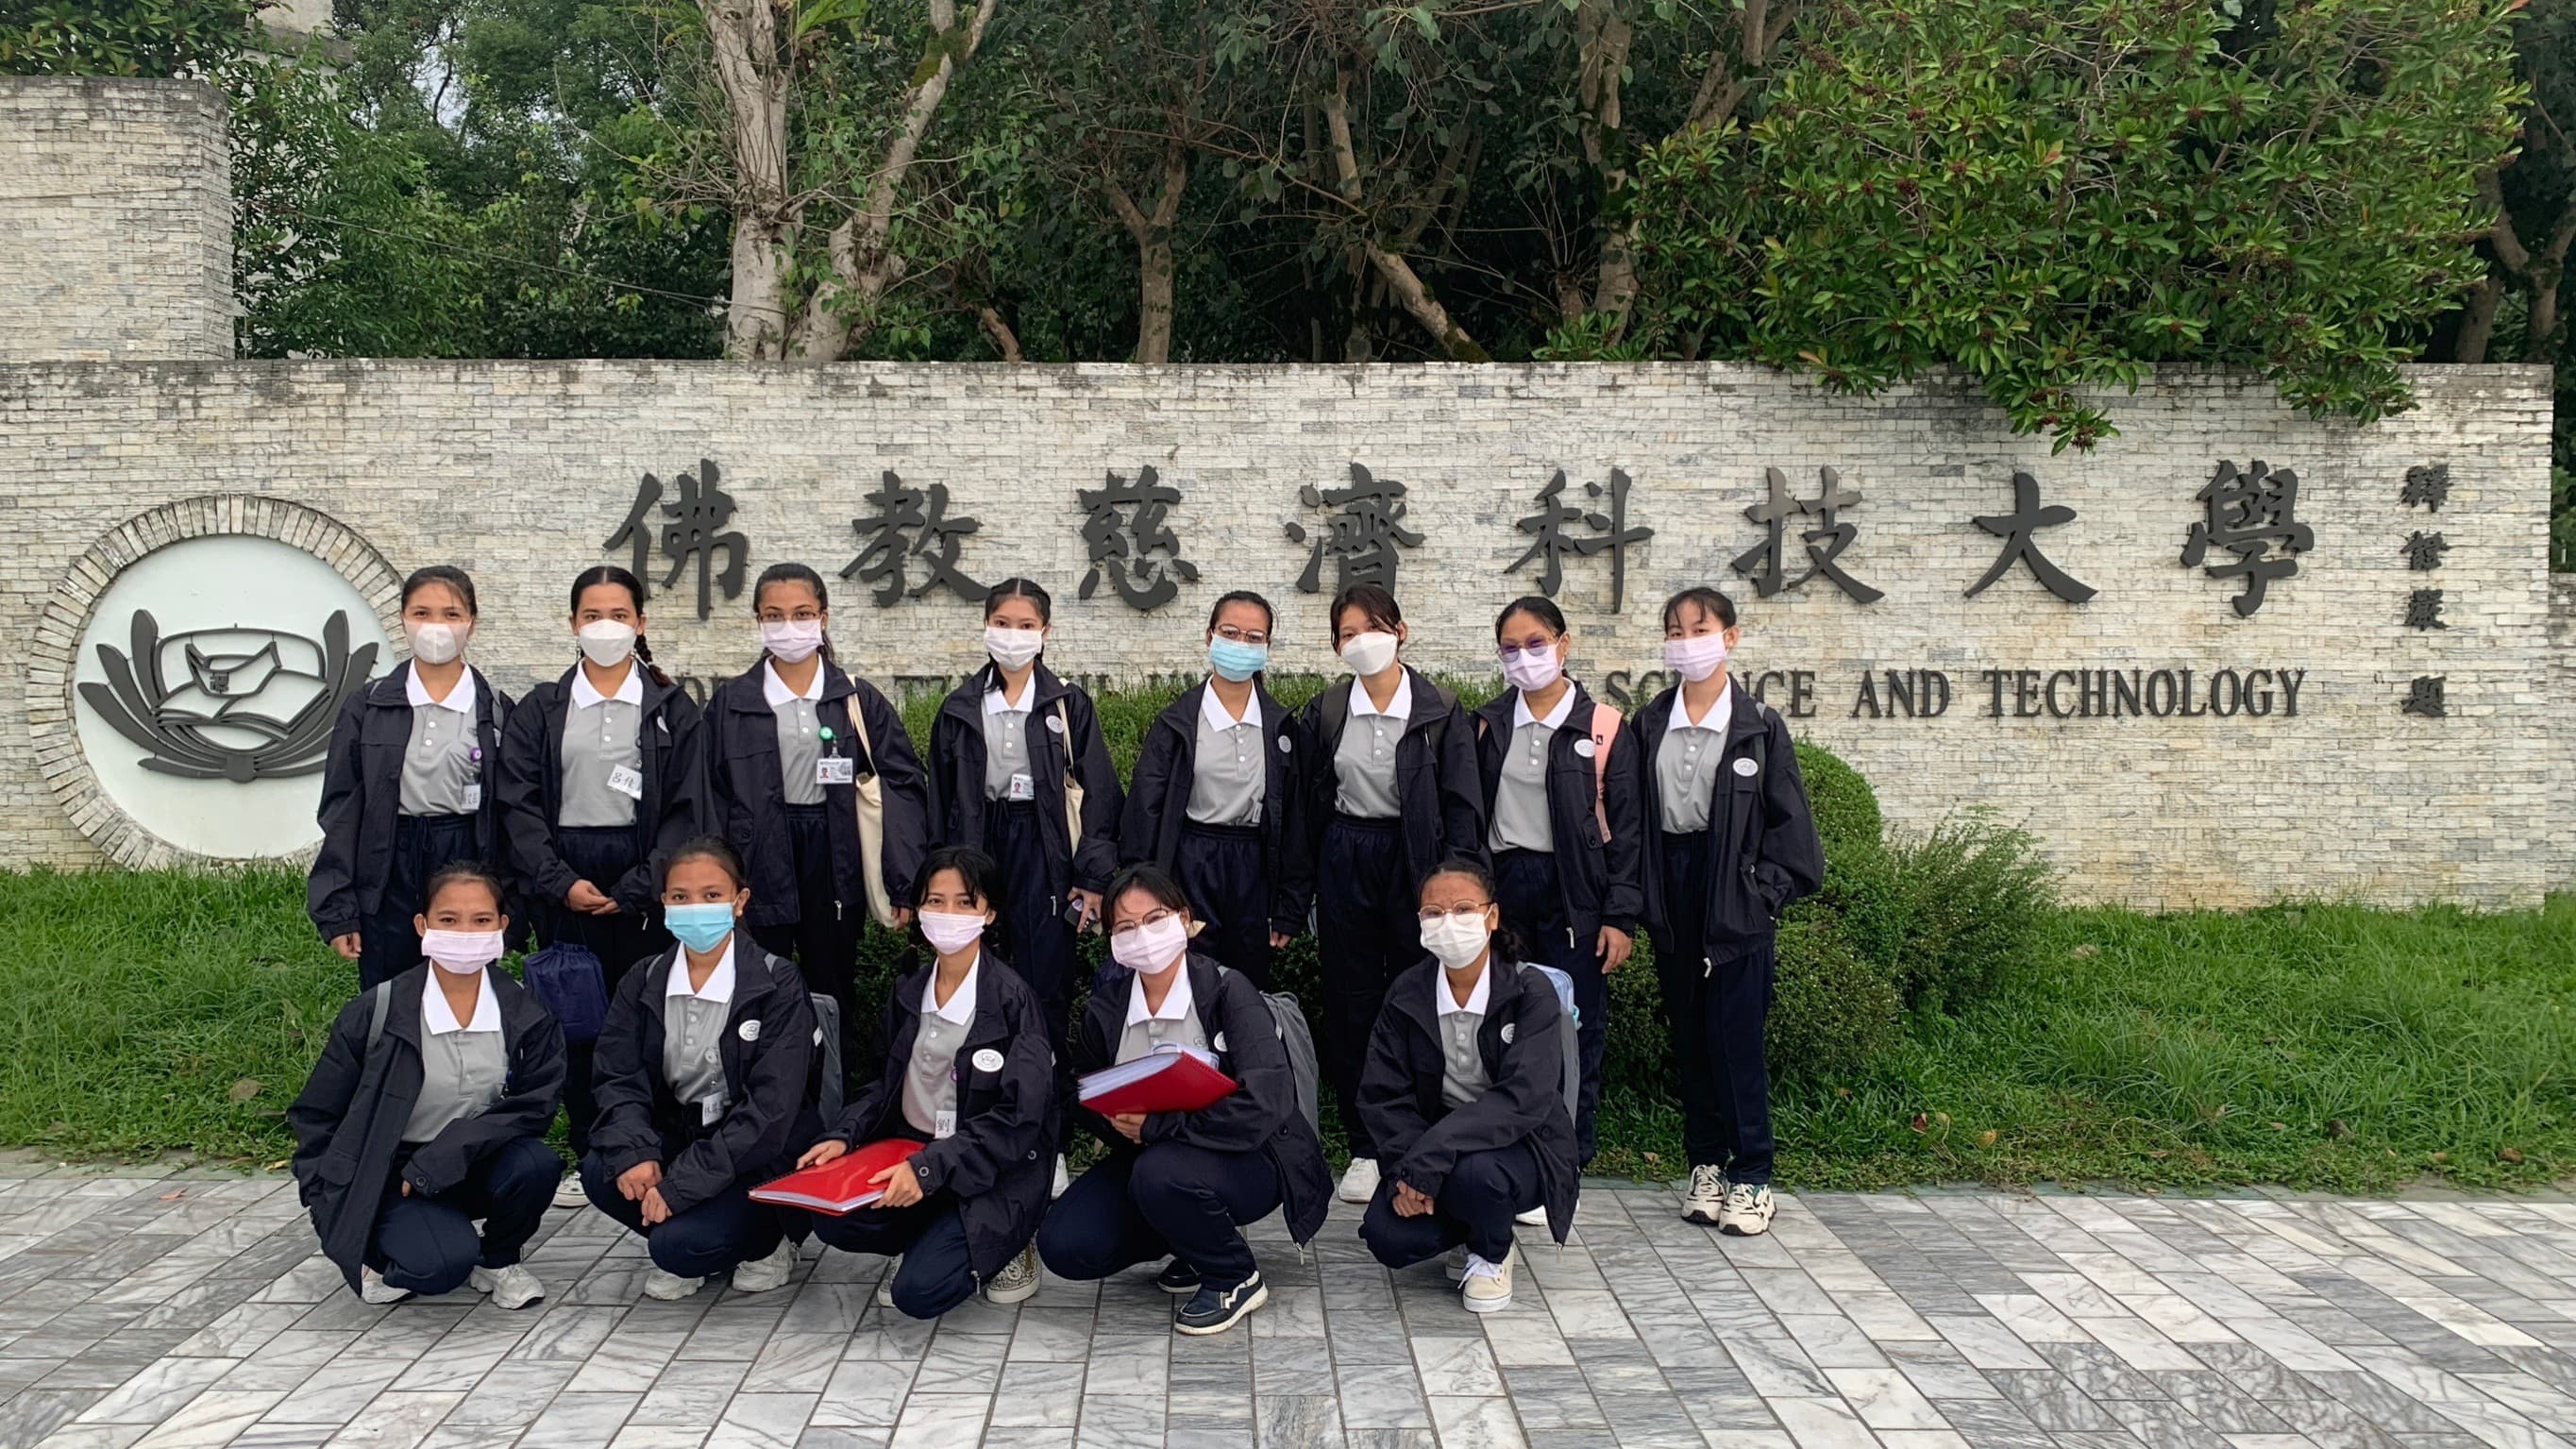 Tzu Chi Philippines caregiving scholars arrive at the Tzu Chi University of Science and Technology in Hualien, Taiwan.